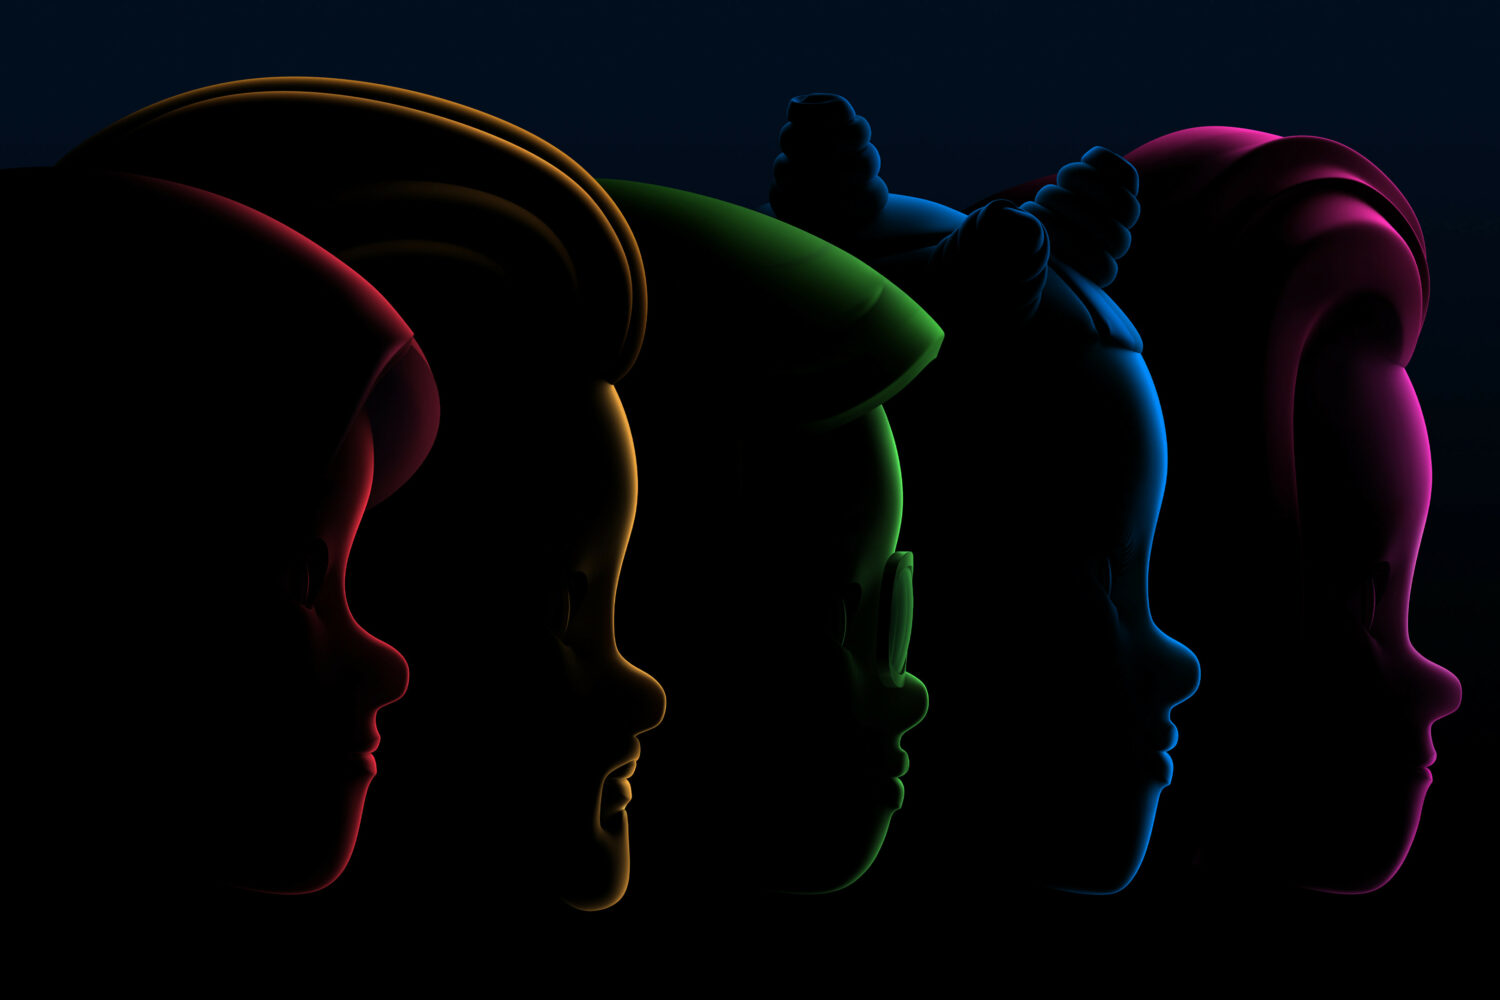 Apple's marketing image showing five Memoji head silhouettes set against a black background, designed to promote its Worldwide Developers Conference (WWDC)